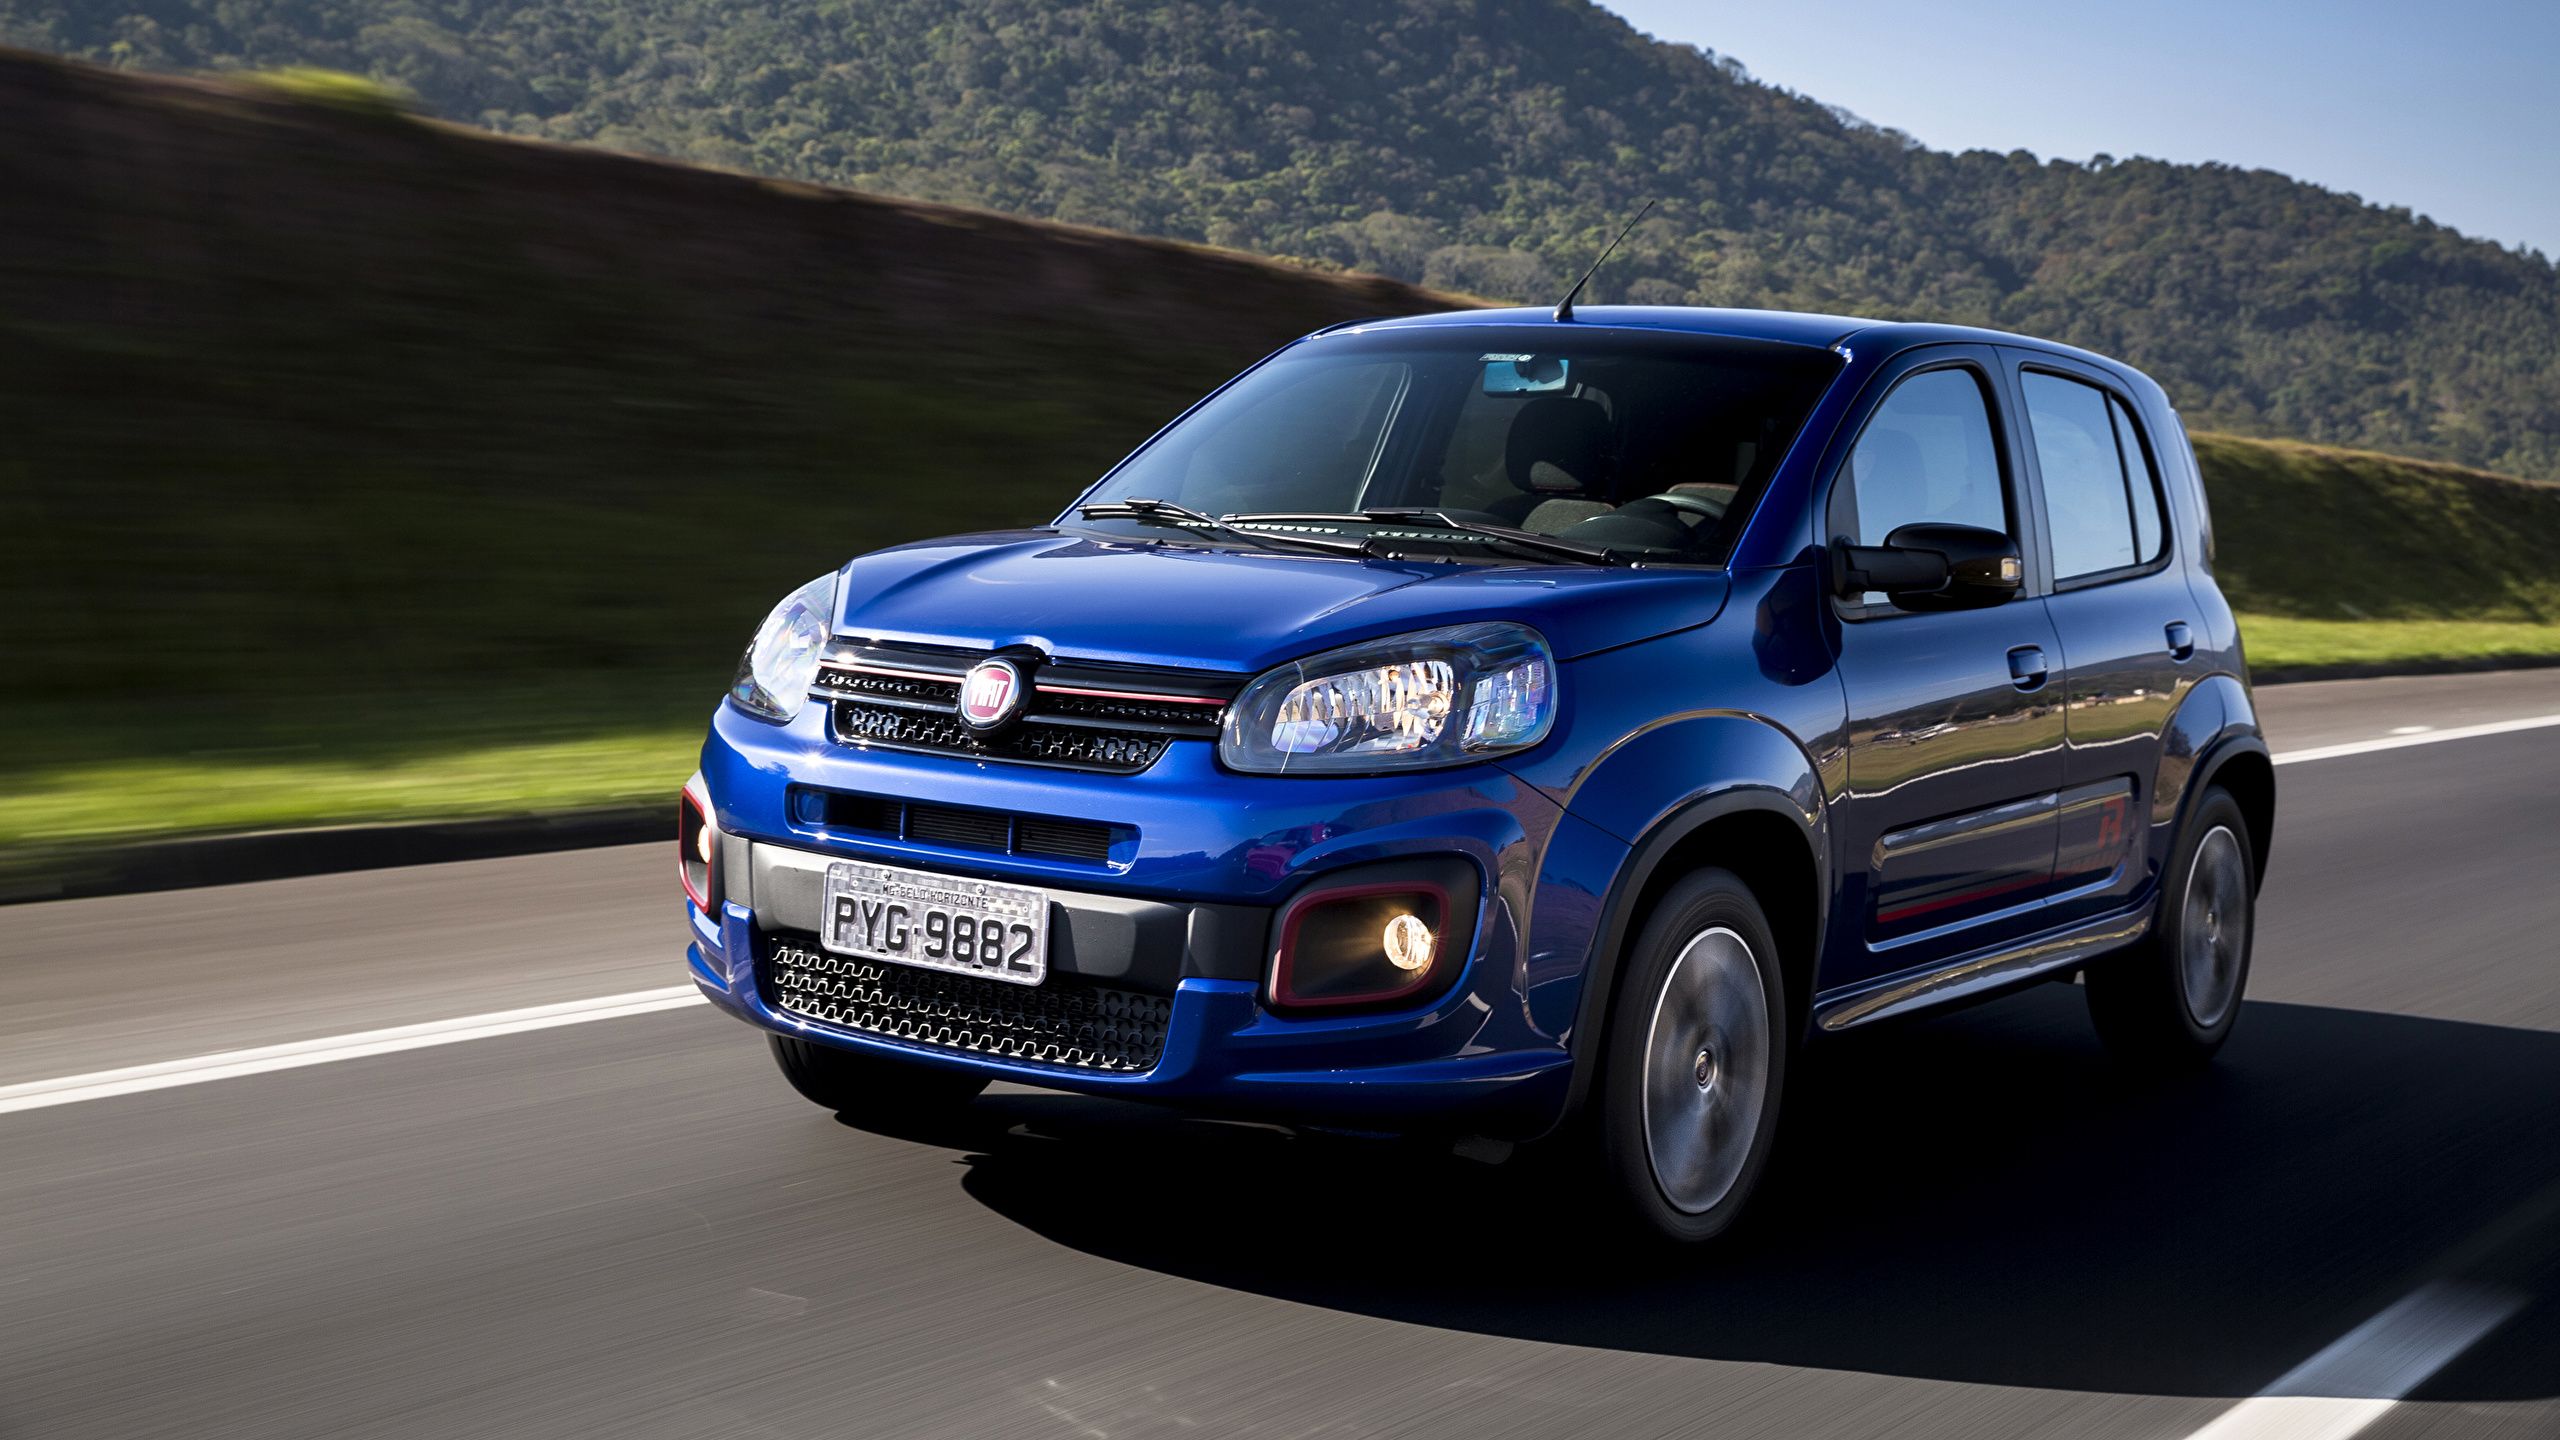 image Fiat 2016 Uno Sporting Blue at speed Cars Metallic 2560x1440